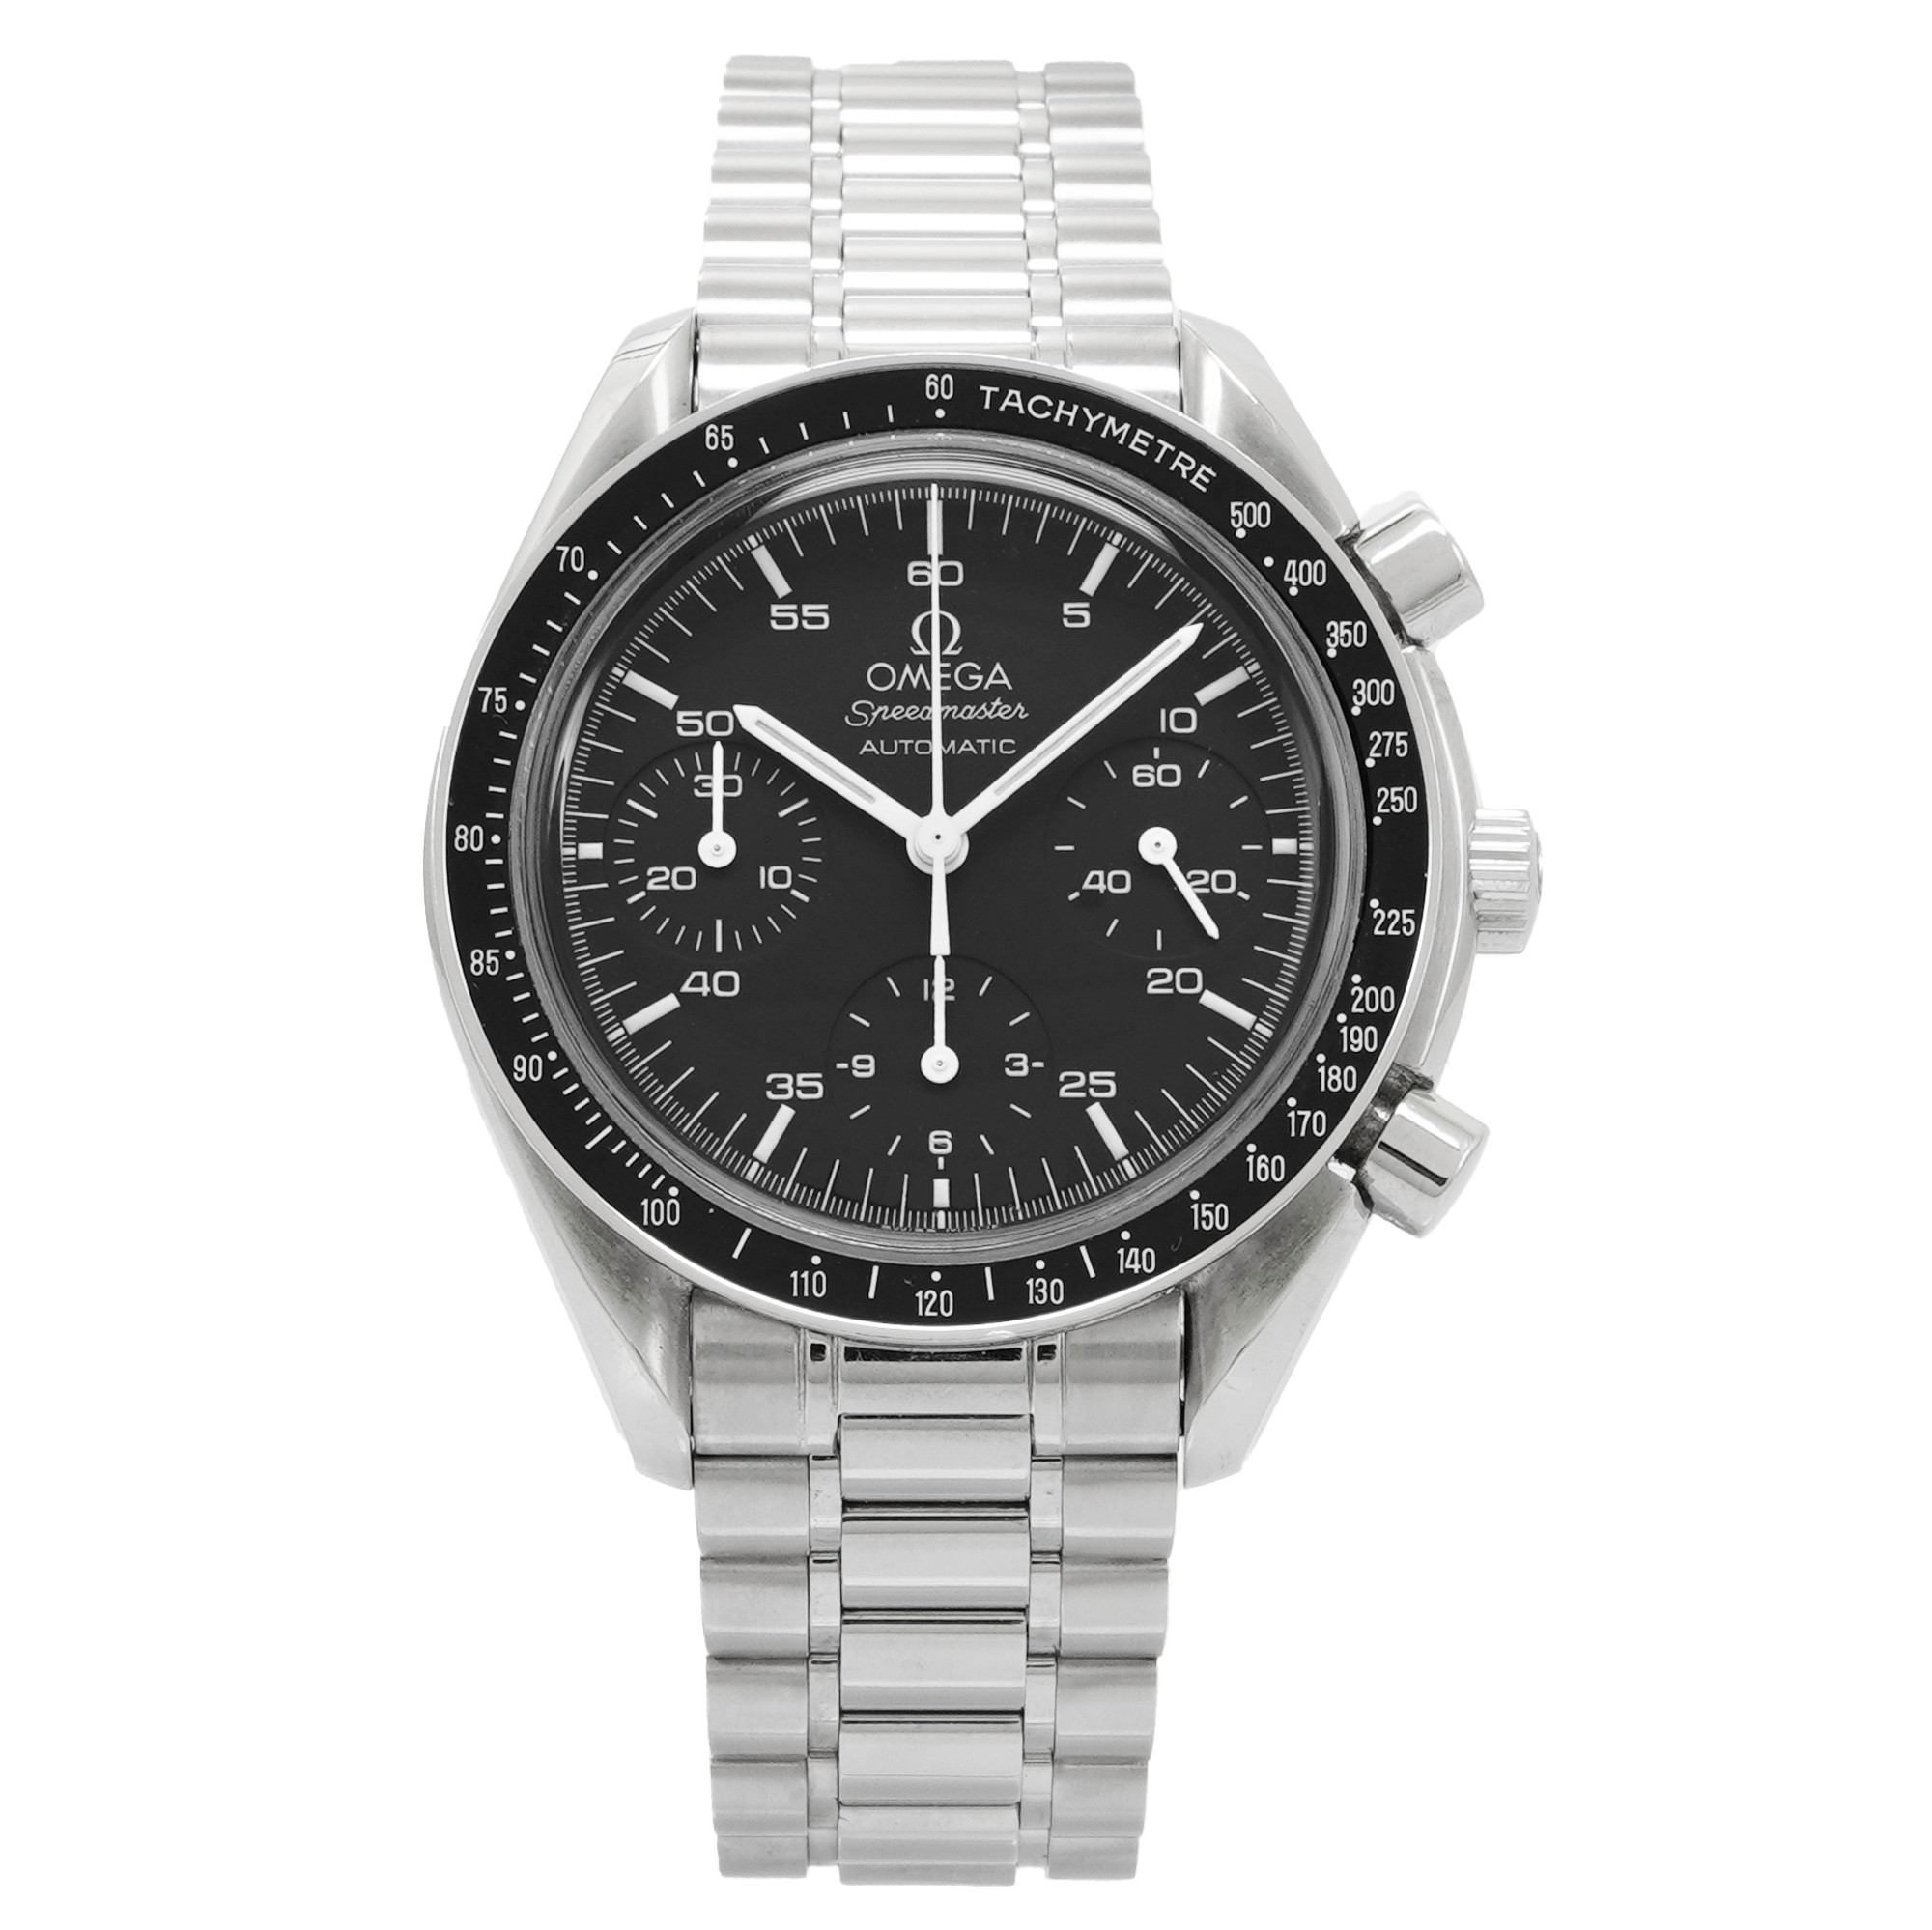 Omega Speedmaster Reduced Automatic Chronograph - Inventory 4271